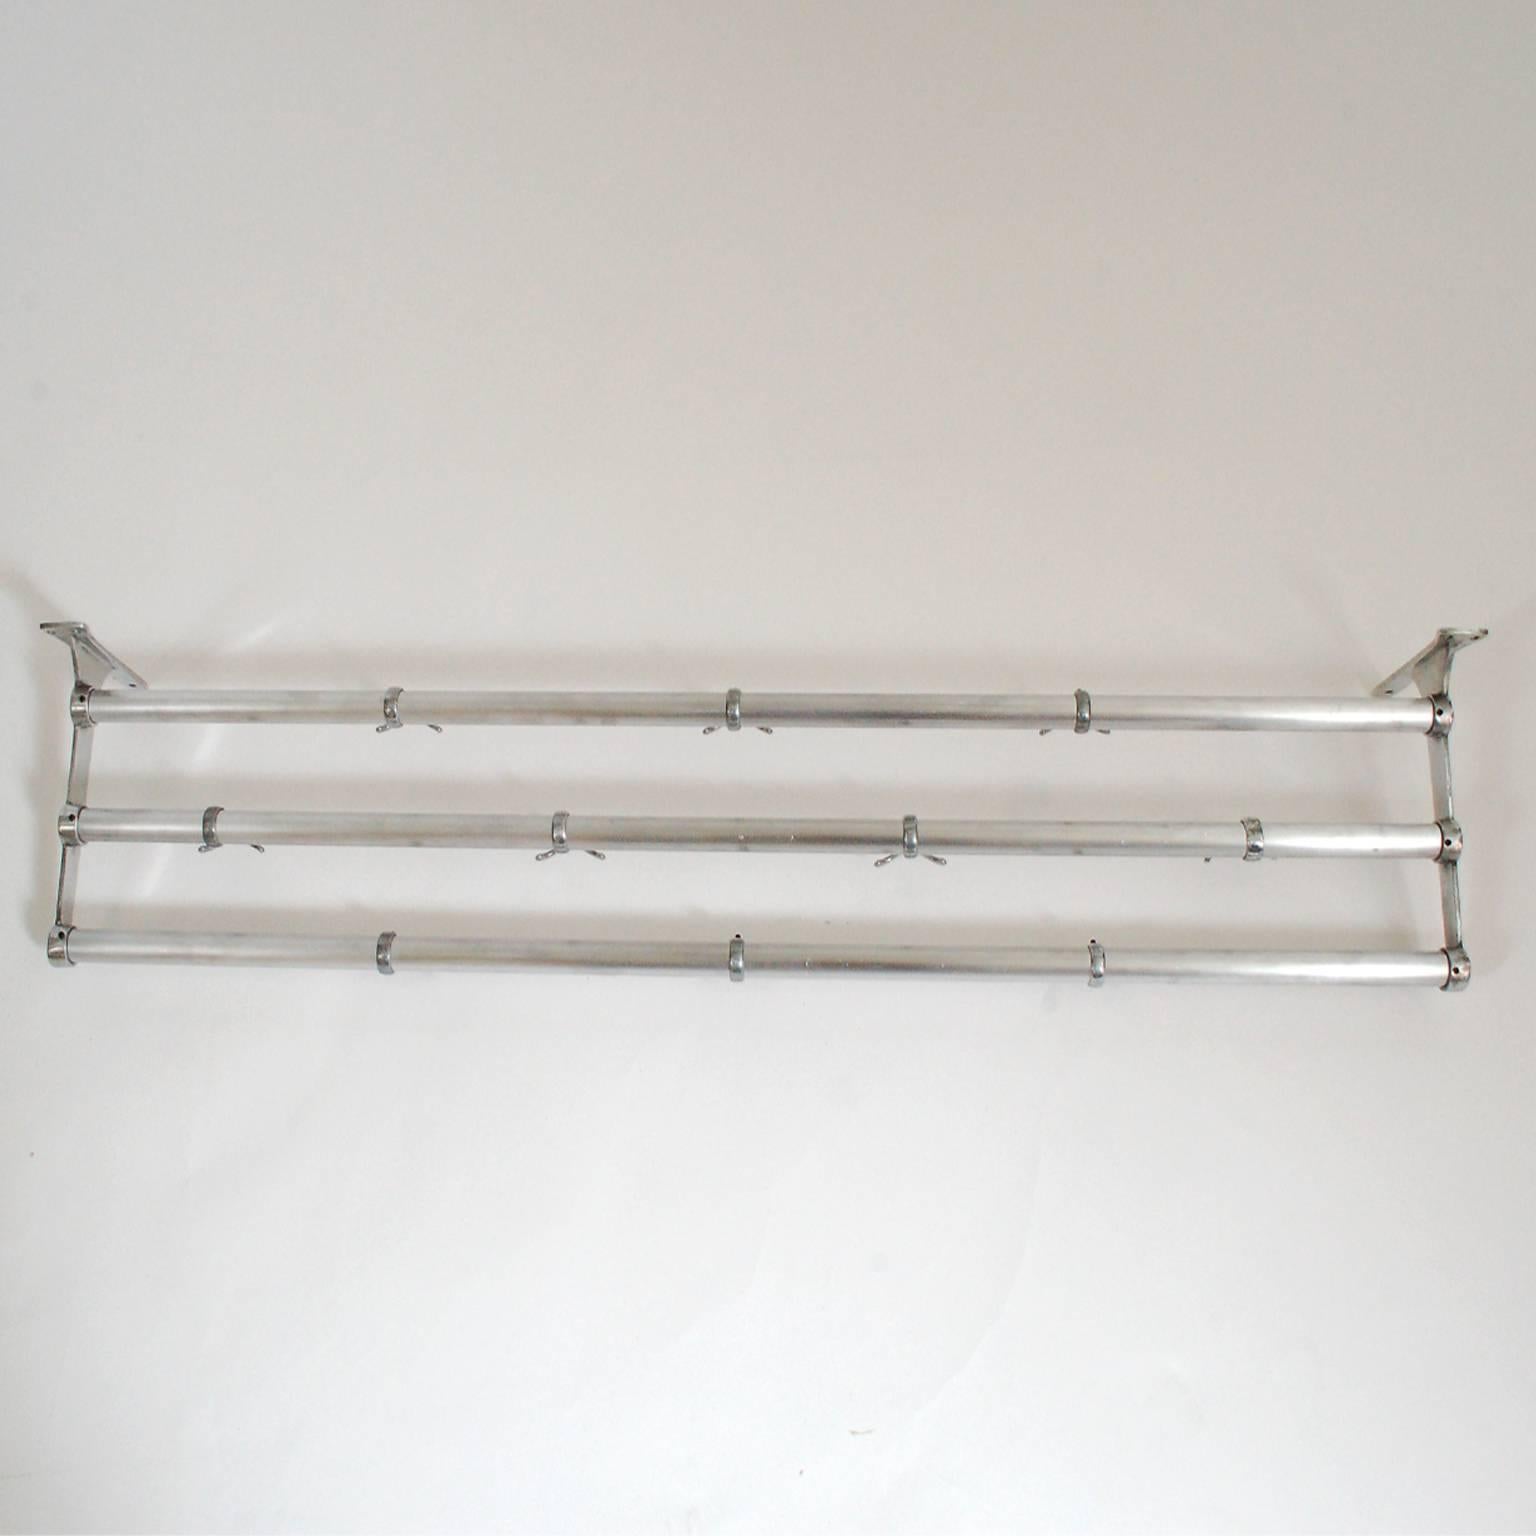 Three rod wall-mounted coat rack, with ten two-sided and adjustable hooks. All aluminum. First half of the 20th century.